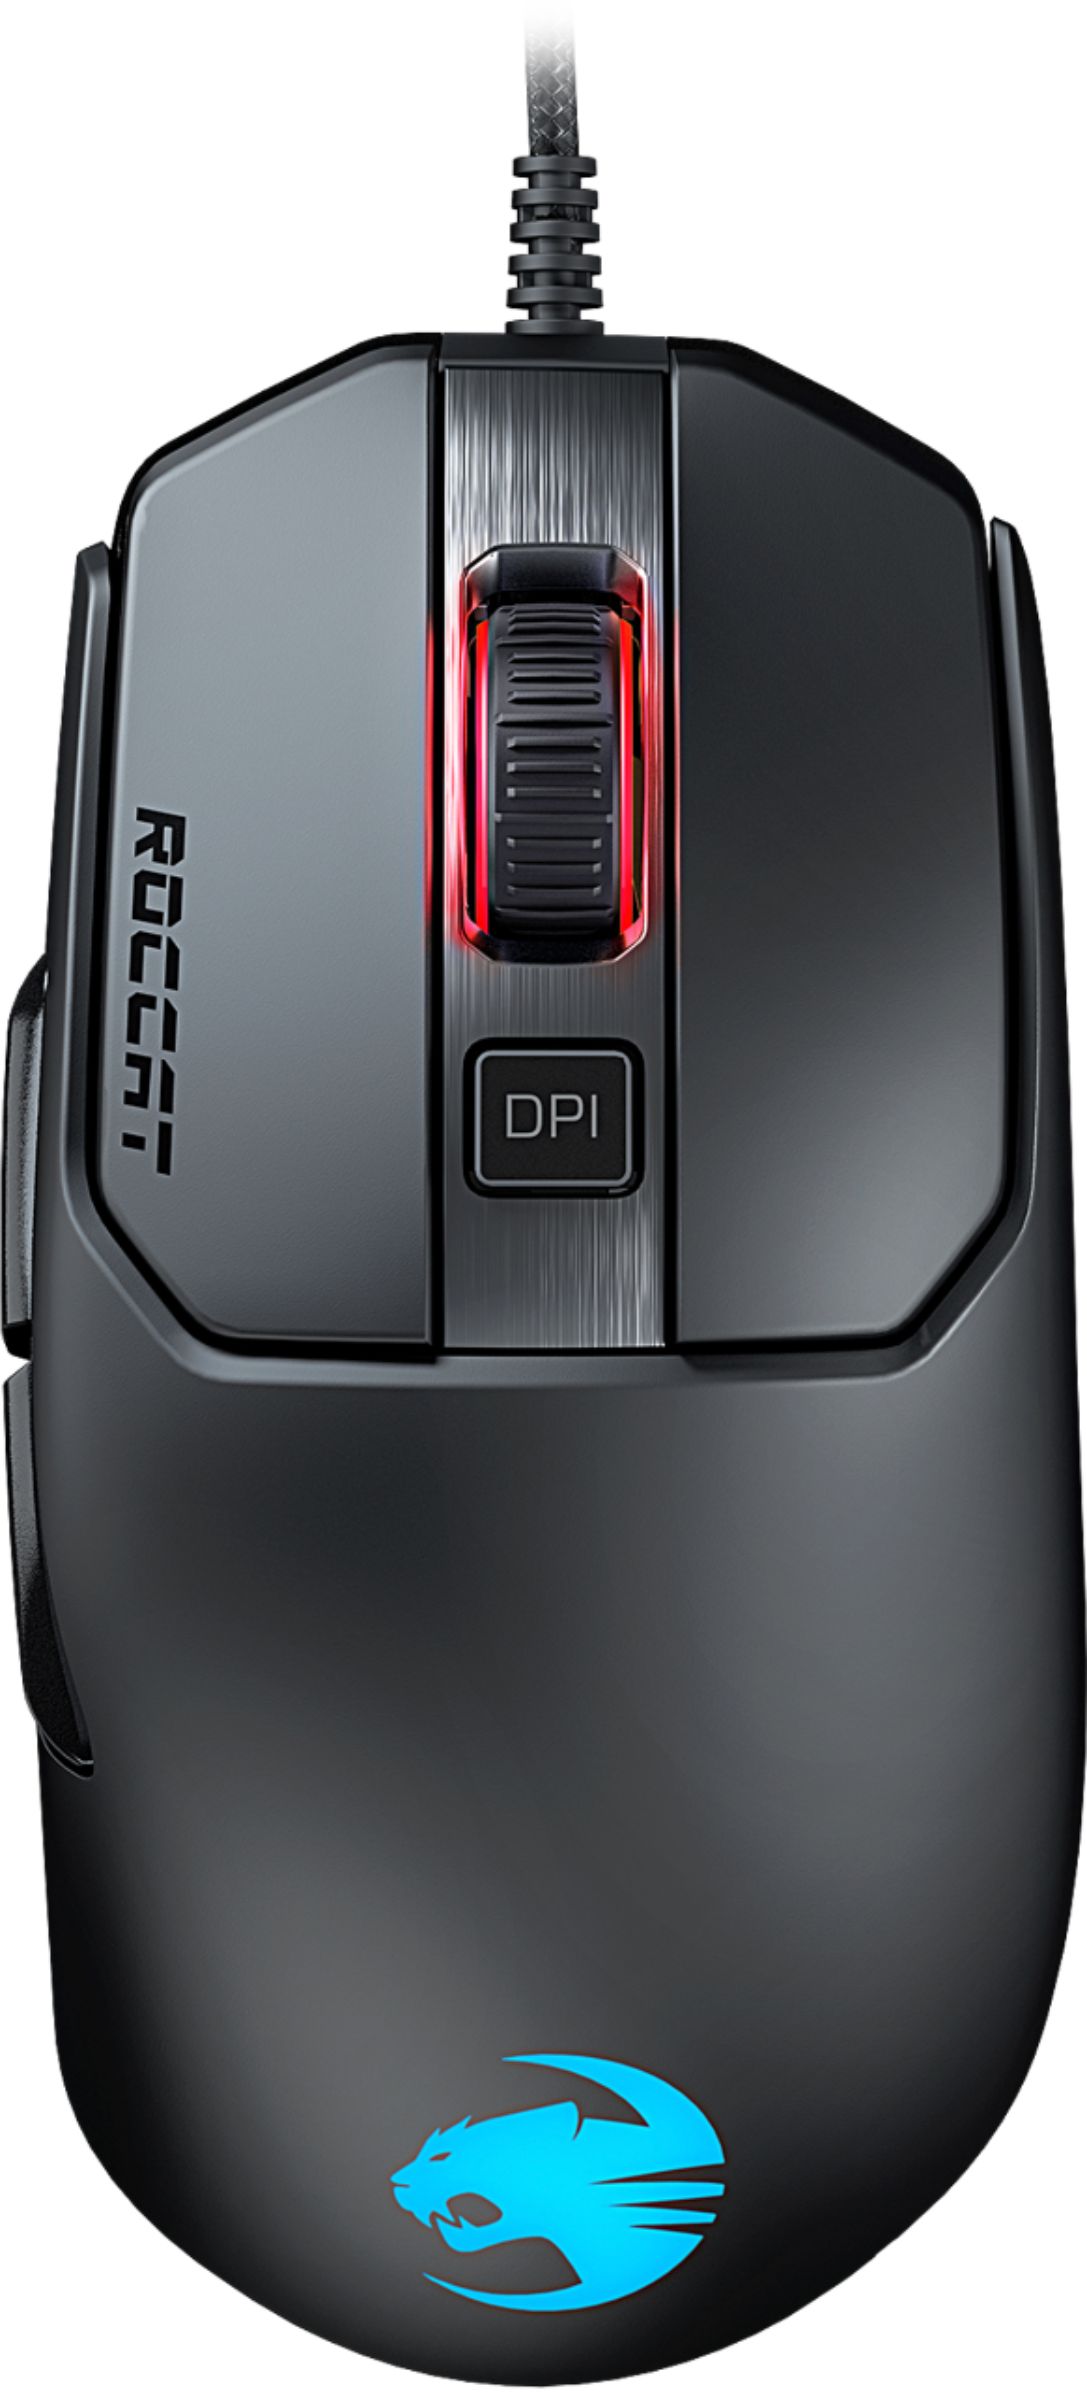 Wired Mouse Optical AIMO 120 ROC-11-612-BK Buy: RGB Best Kain Black Gaming with Lighting ROCCAT